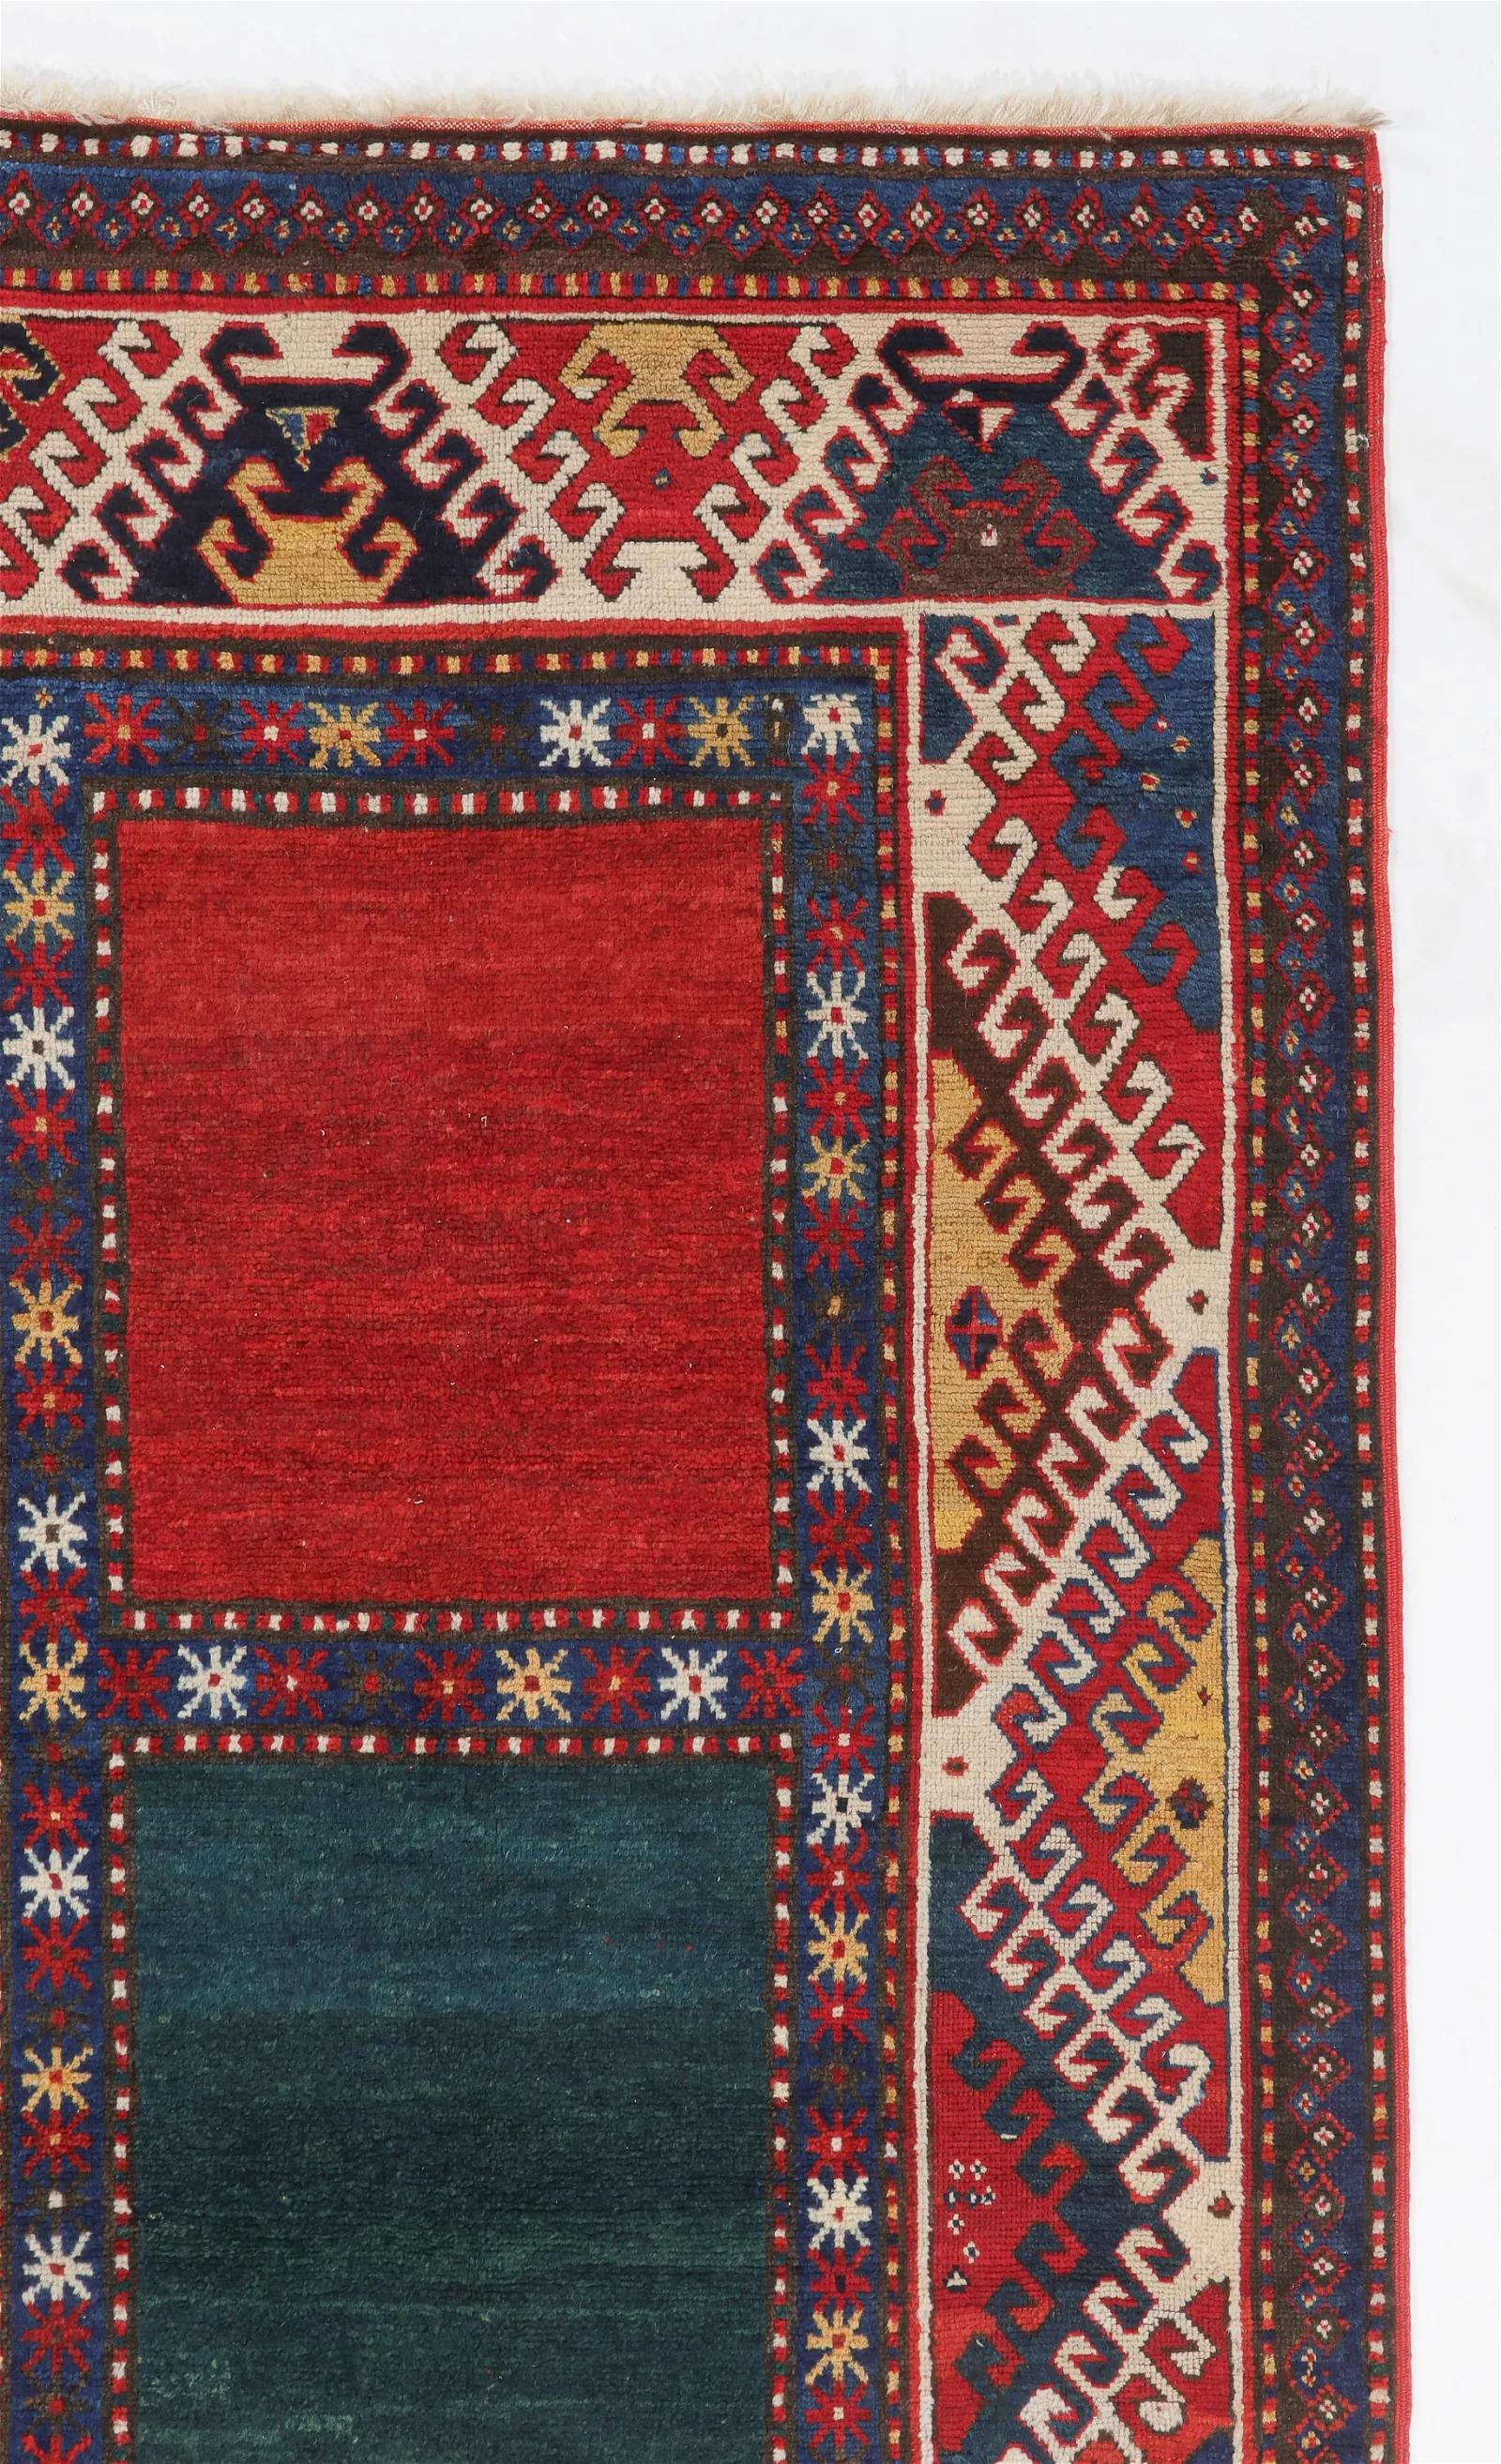 Unveil the charm of Caucasus craftsmanship with this Vintage Borjalu Kazak Rug from the early to mid-20th century. Measuring 4 feet 3 inches in width and 8 feet 11 inches in length (130 x 272 cm), this captivating rug is a testament to the rich